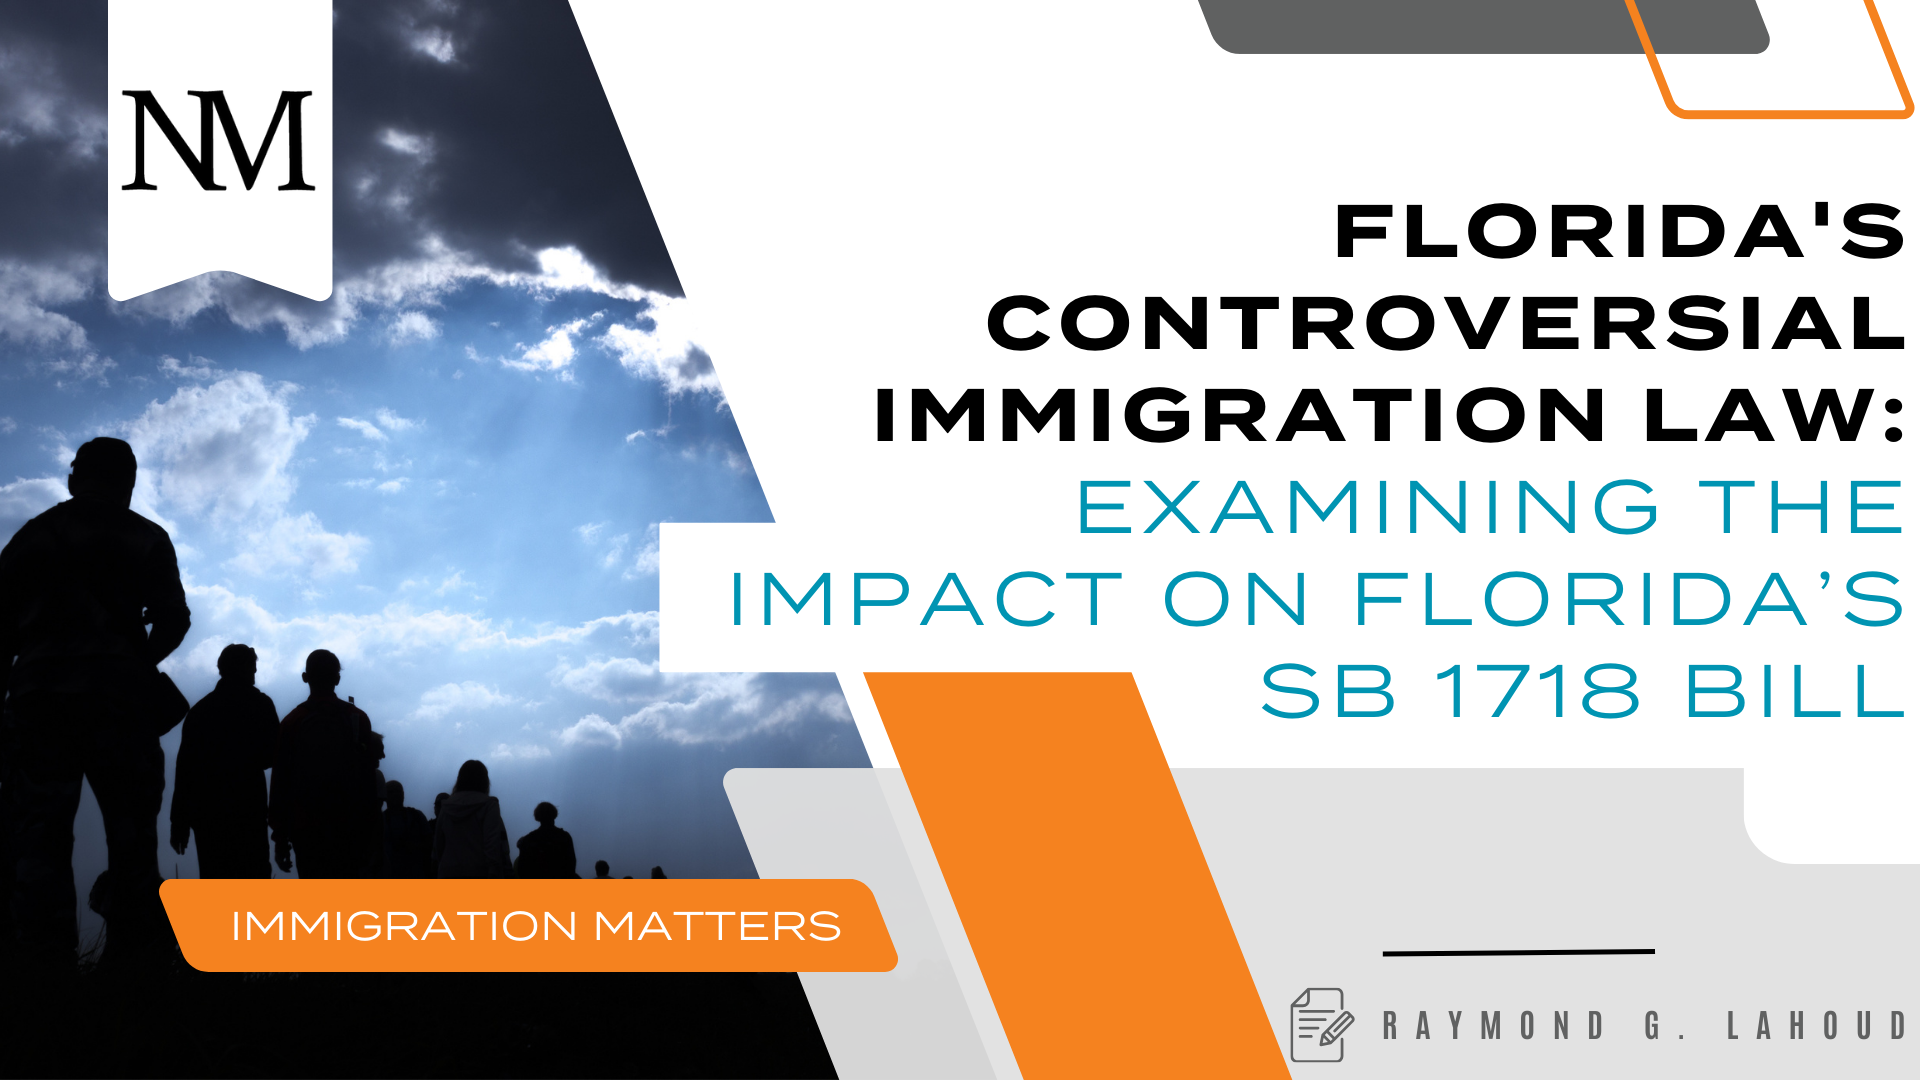 Florida’s Controversial Immigration Law: Examining the Impact